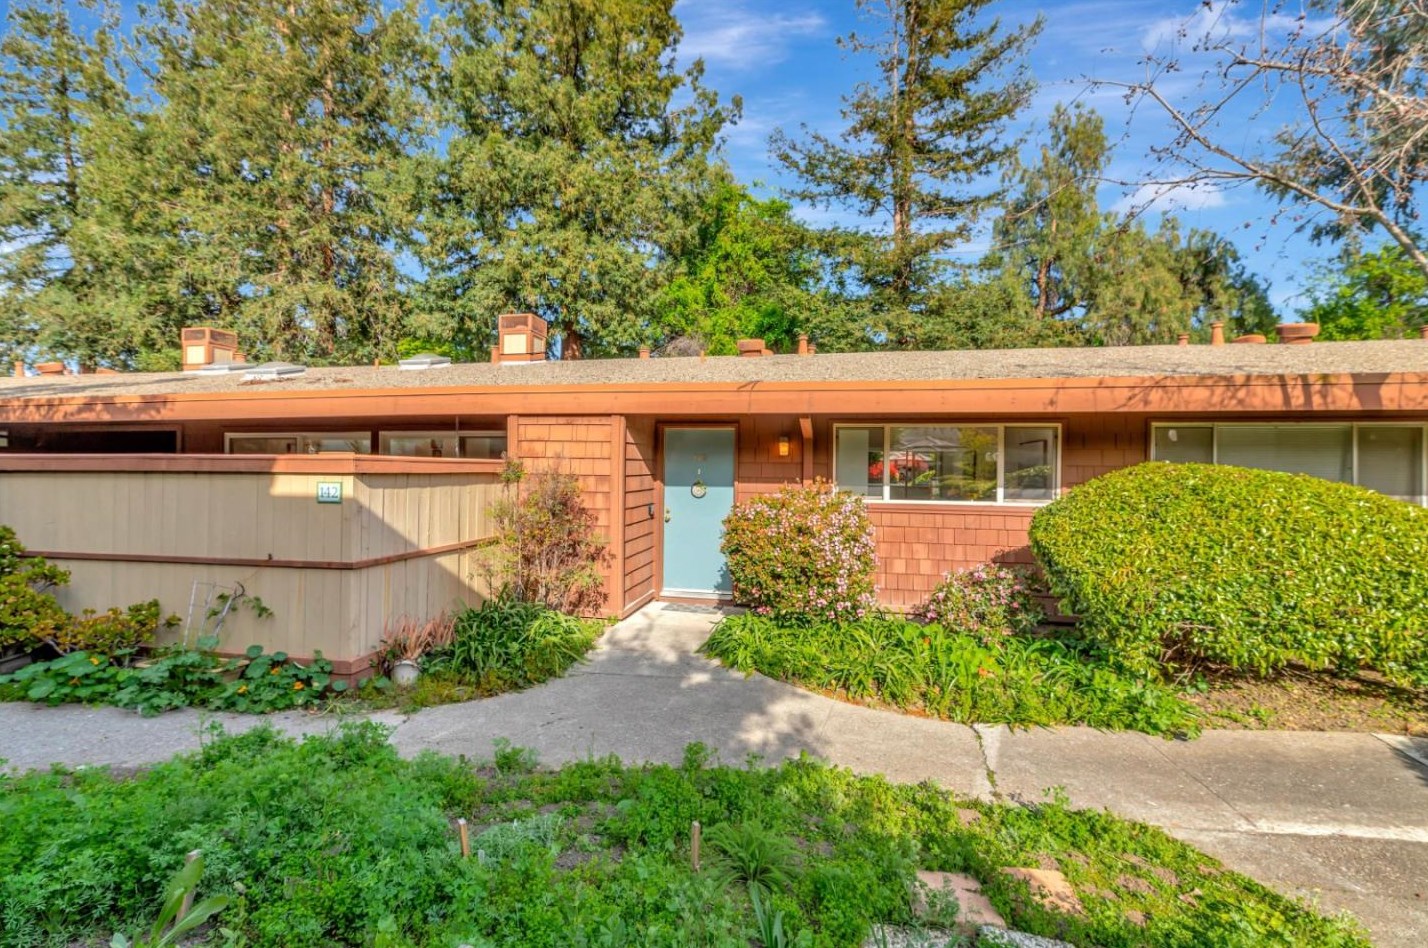 500 W Middlefield Rd 142, Mountain View, CA 94043